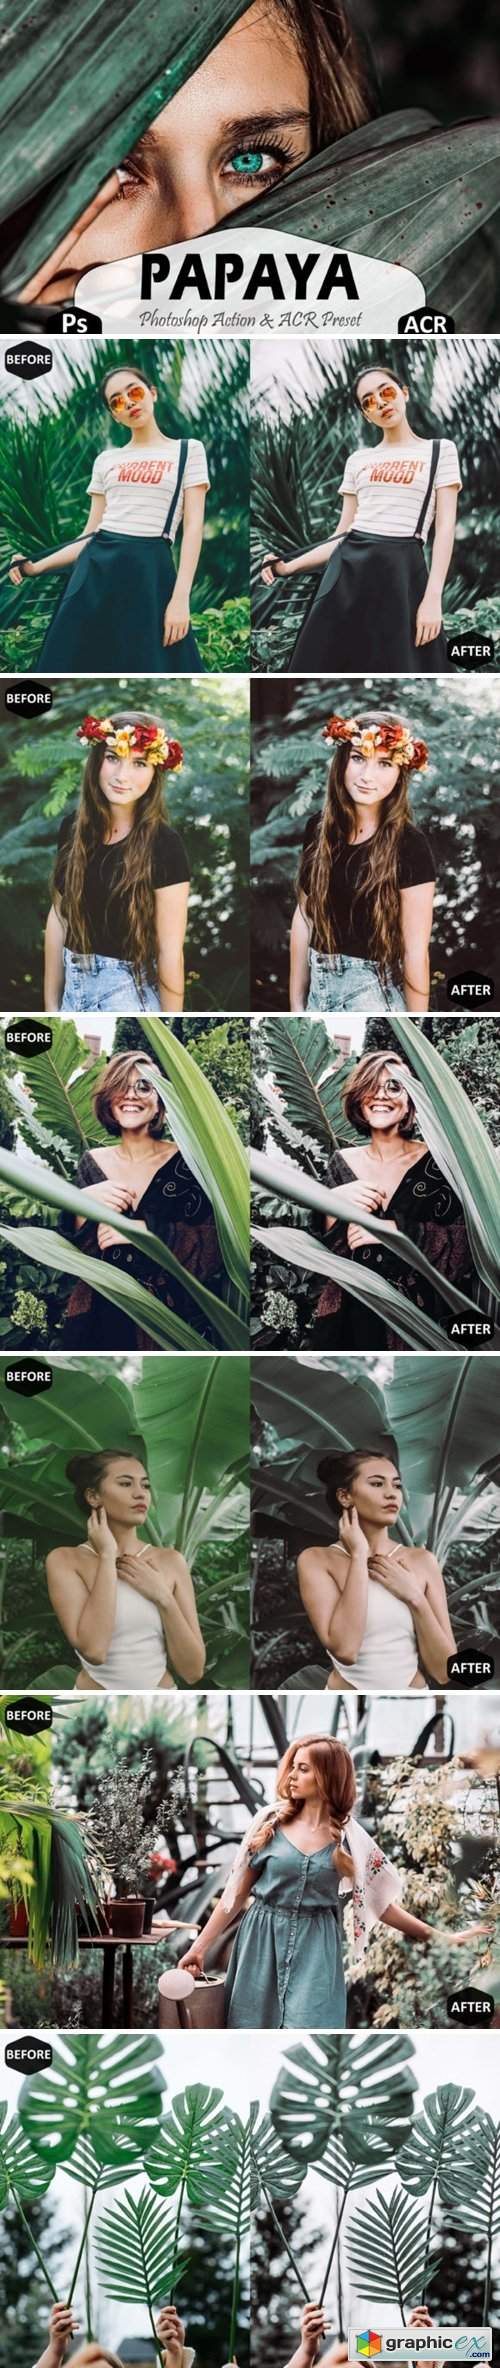  Papaya Photoshop Actions and ACR Presets 